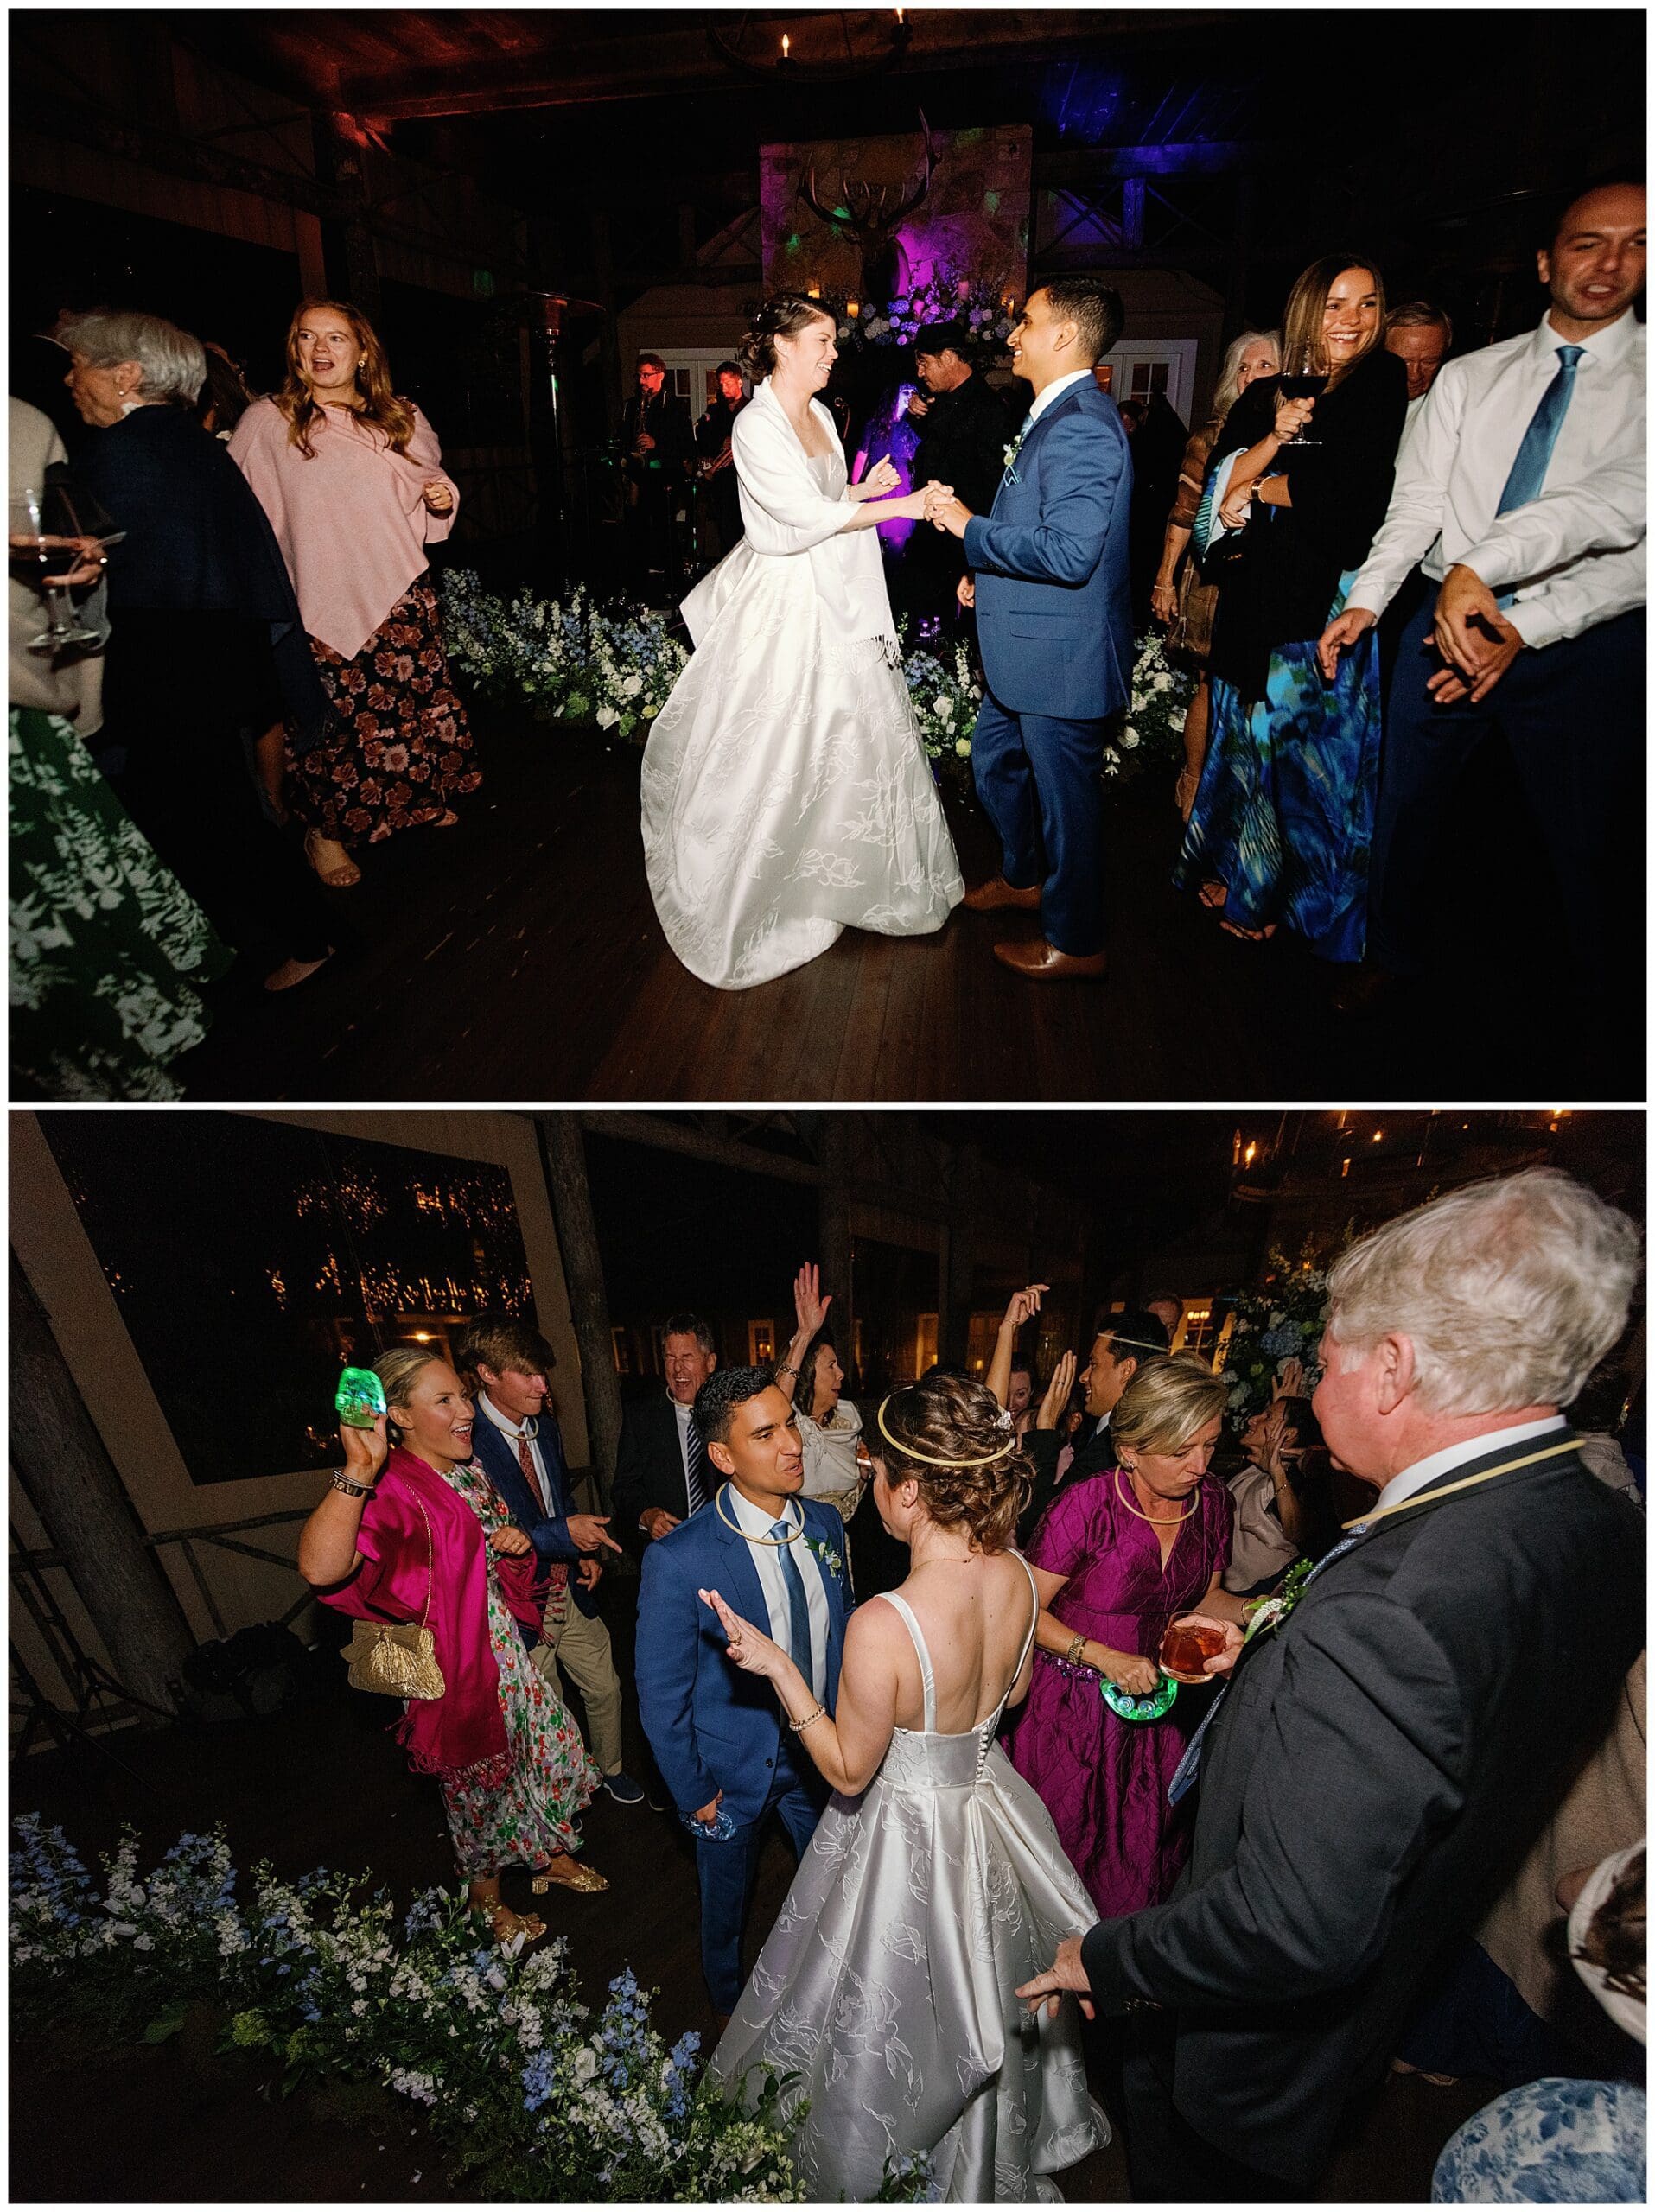 A bride and groom dance at a wedding reception.